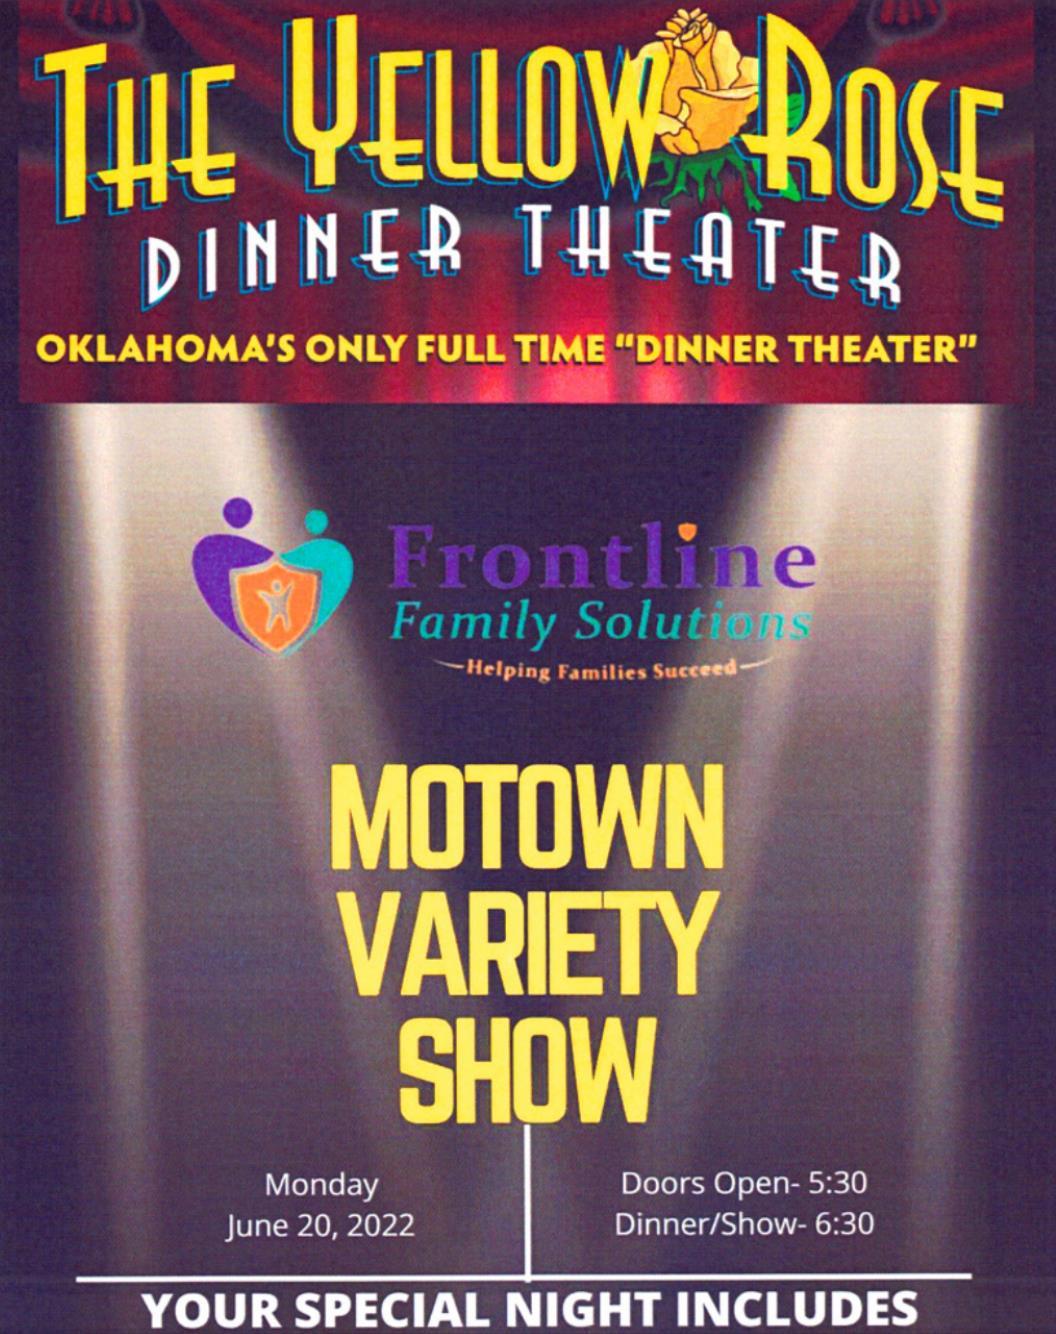 Frontline Family Solutions partners with Yellow Rose Dinner Theater to raise funds Newcastle Pacer